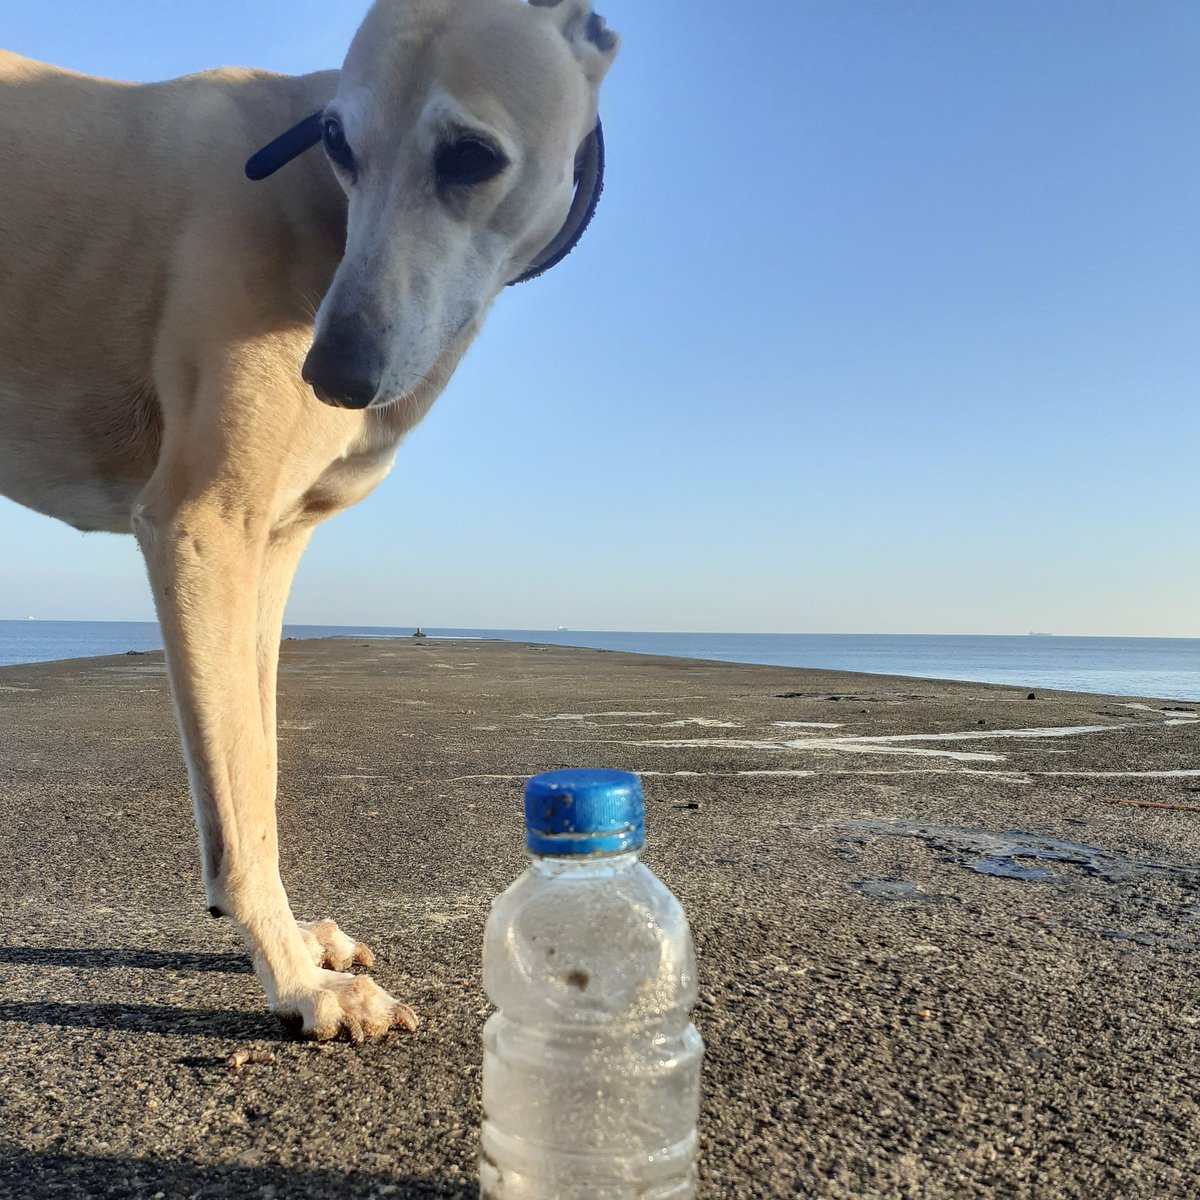 Look how sad Fin is when he finds plastic bottles on the beach ! #refillnotlandfill #plasticpollution #2minutebeachclean